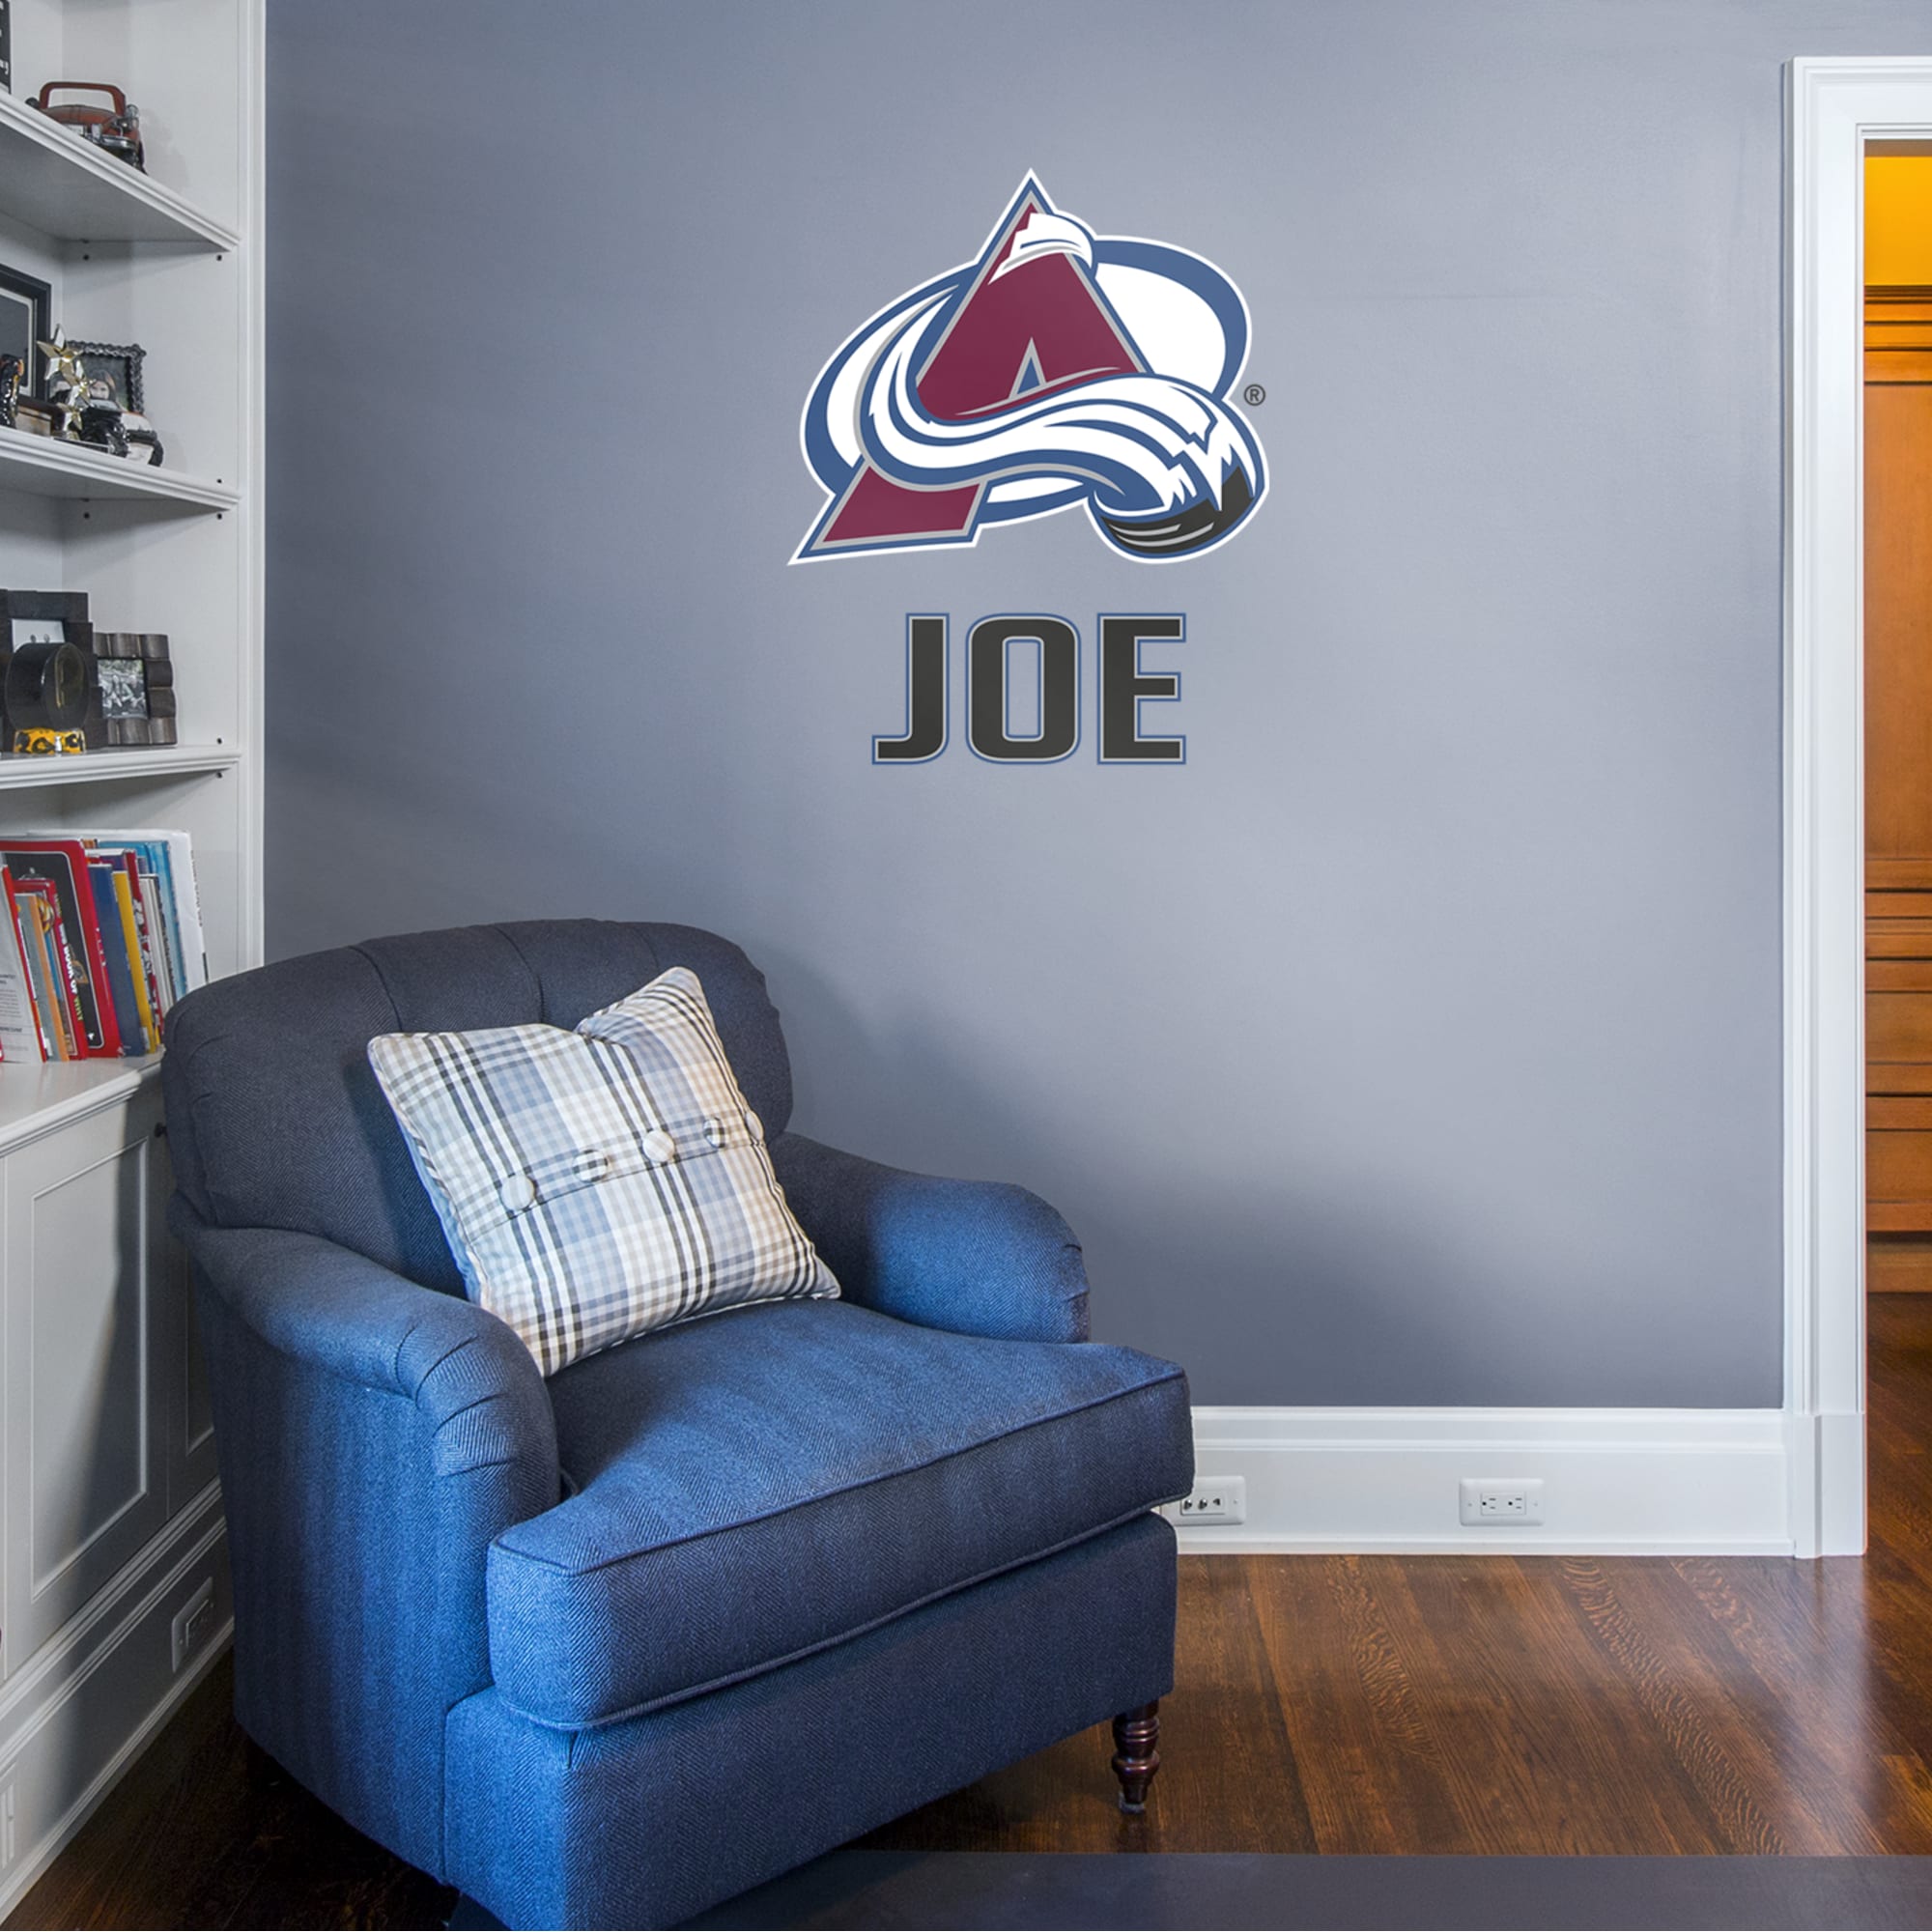 Colorado Avalanche: Stacked Personalized Name - Officially Licensed NHL Transfer Decal in Black (39.5"W x 52"H) by Fathead | Vin